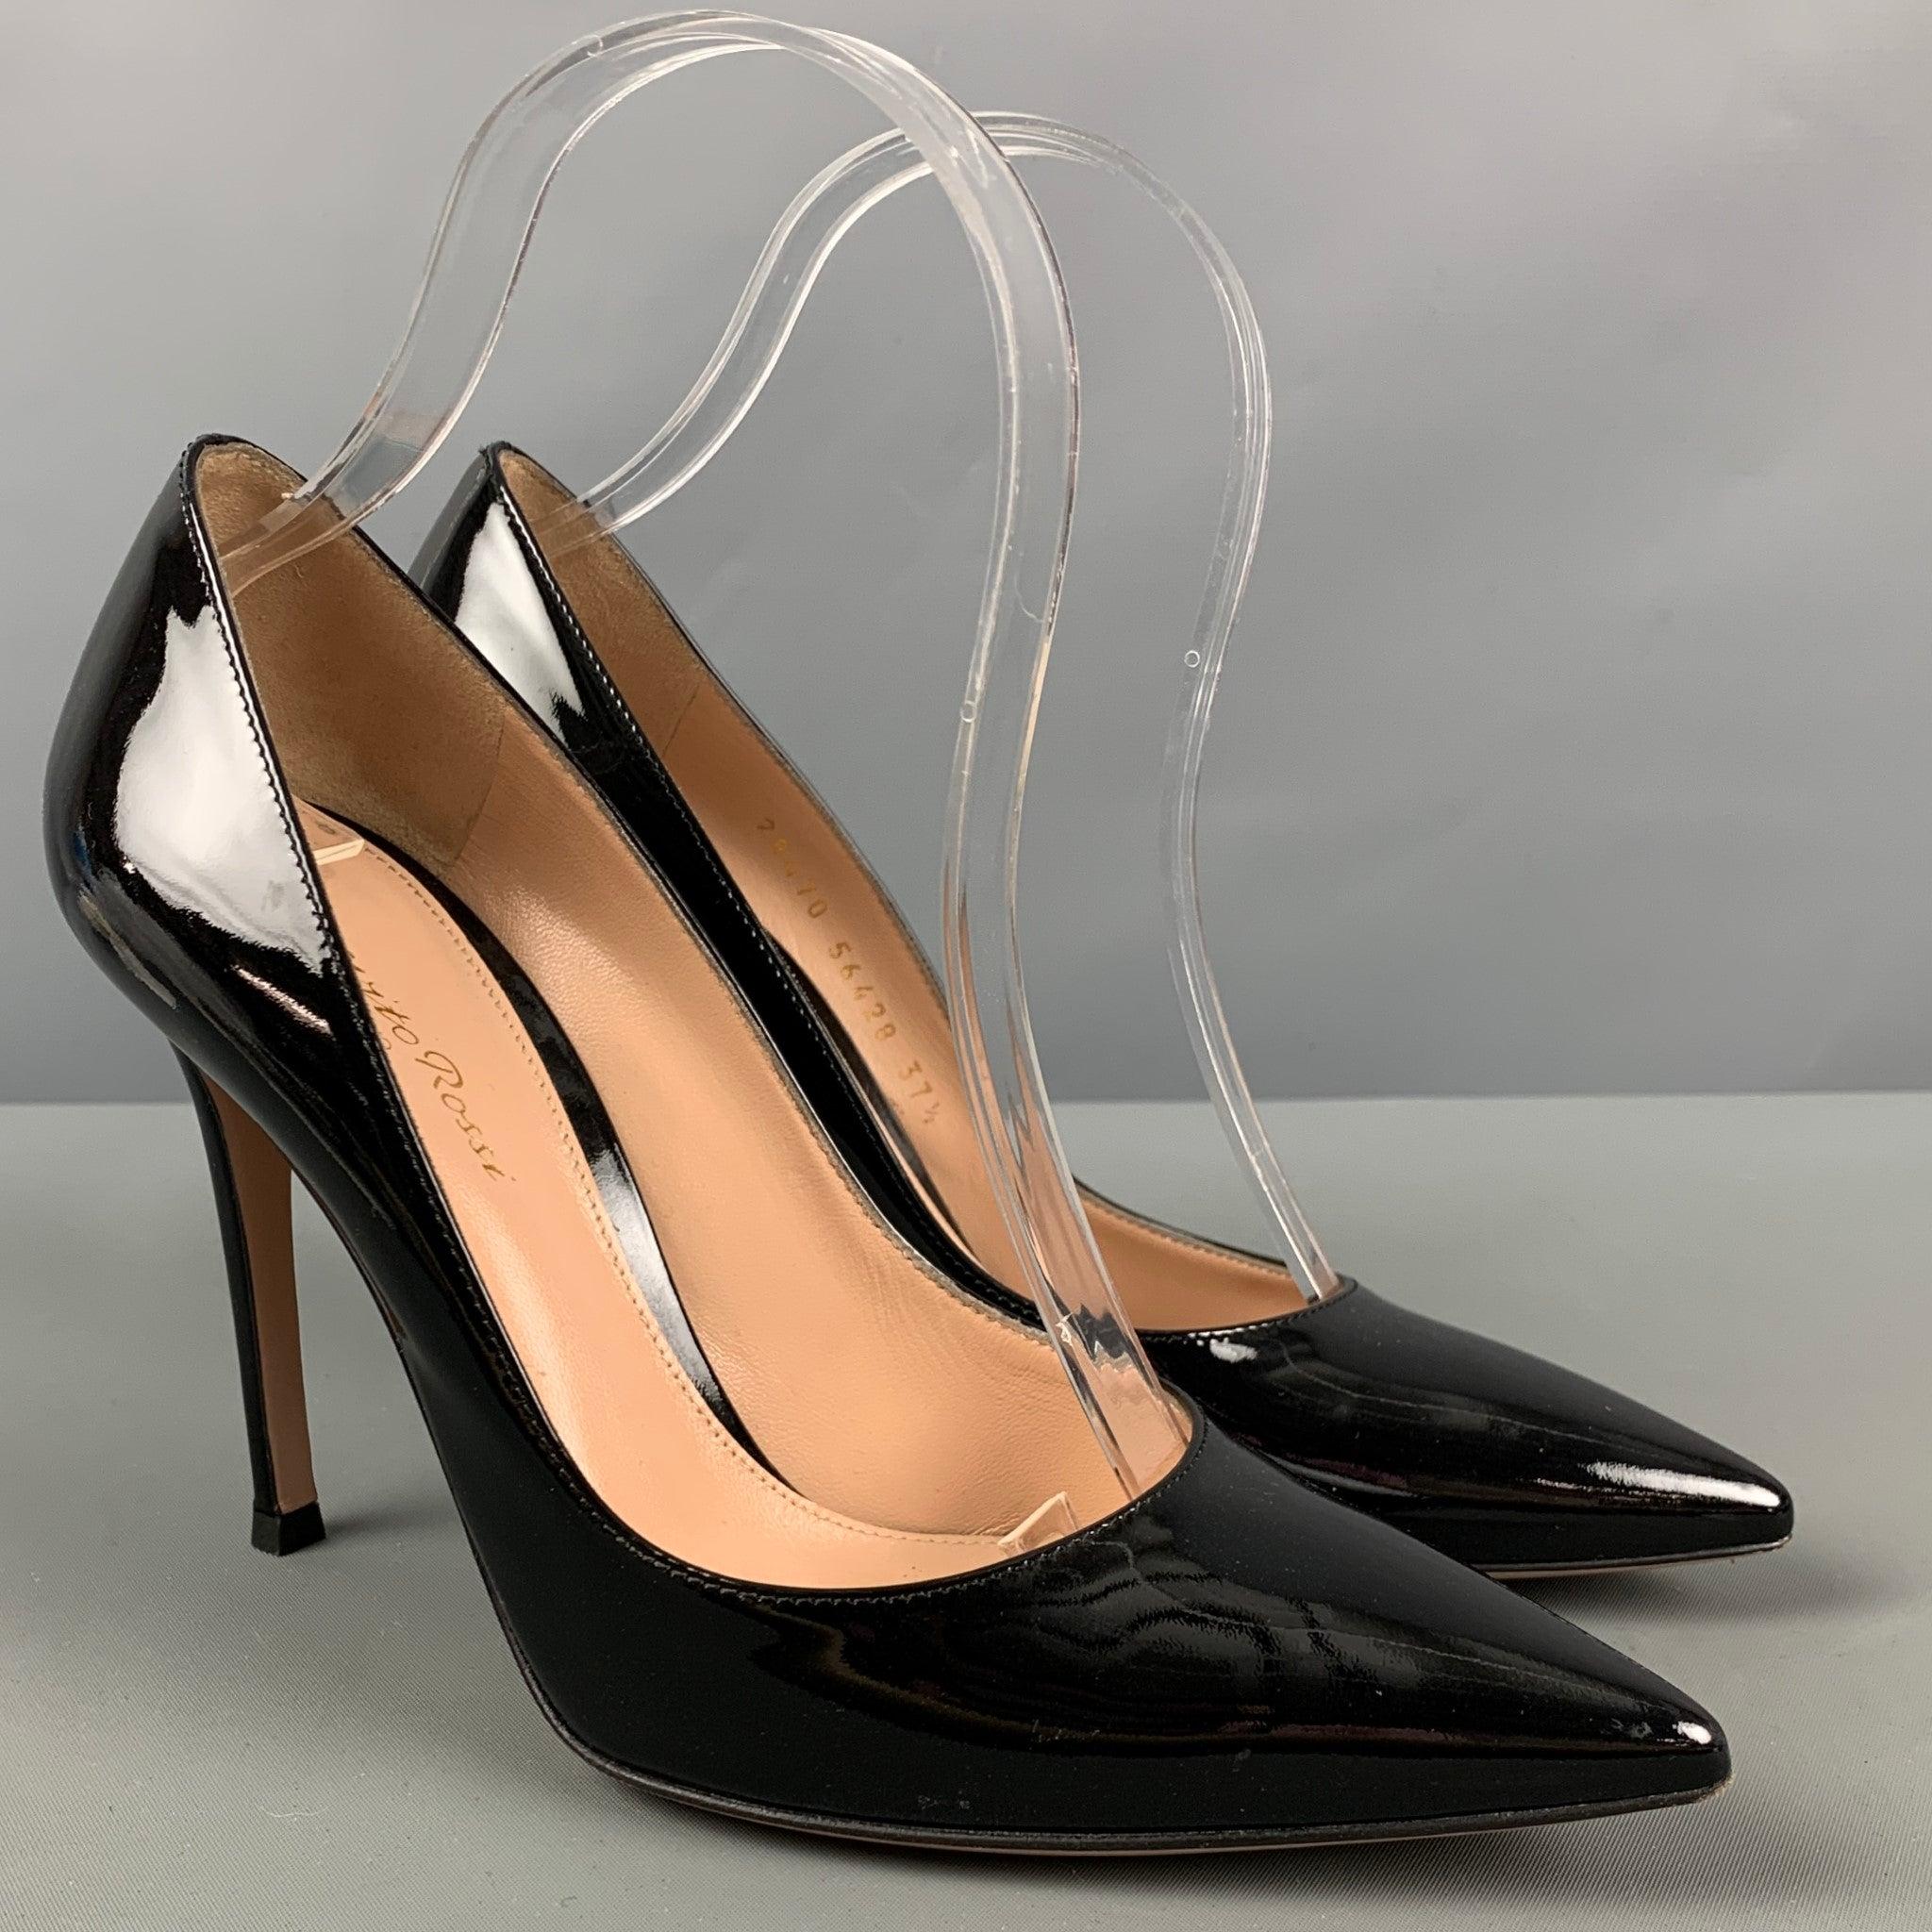 GIANVITO ROSSI pumps in a black patent leather featuring a pointed toe. Made in Italy.Excellent Pre-Owned Condition. 

Marked:   28470 56428 

Measurements: 
  Length: 8.25 inches 
Width: 3 inches Height: 6.25 inches 
  
  
 
Reference: